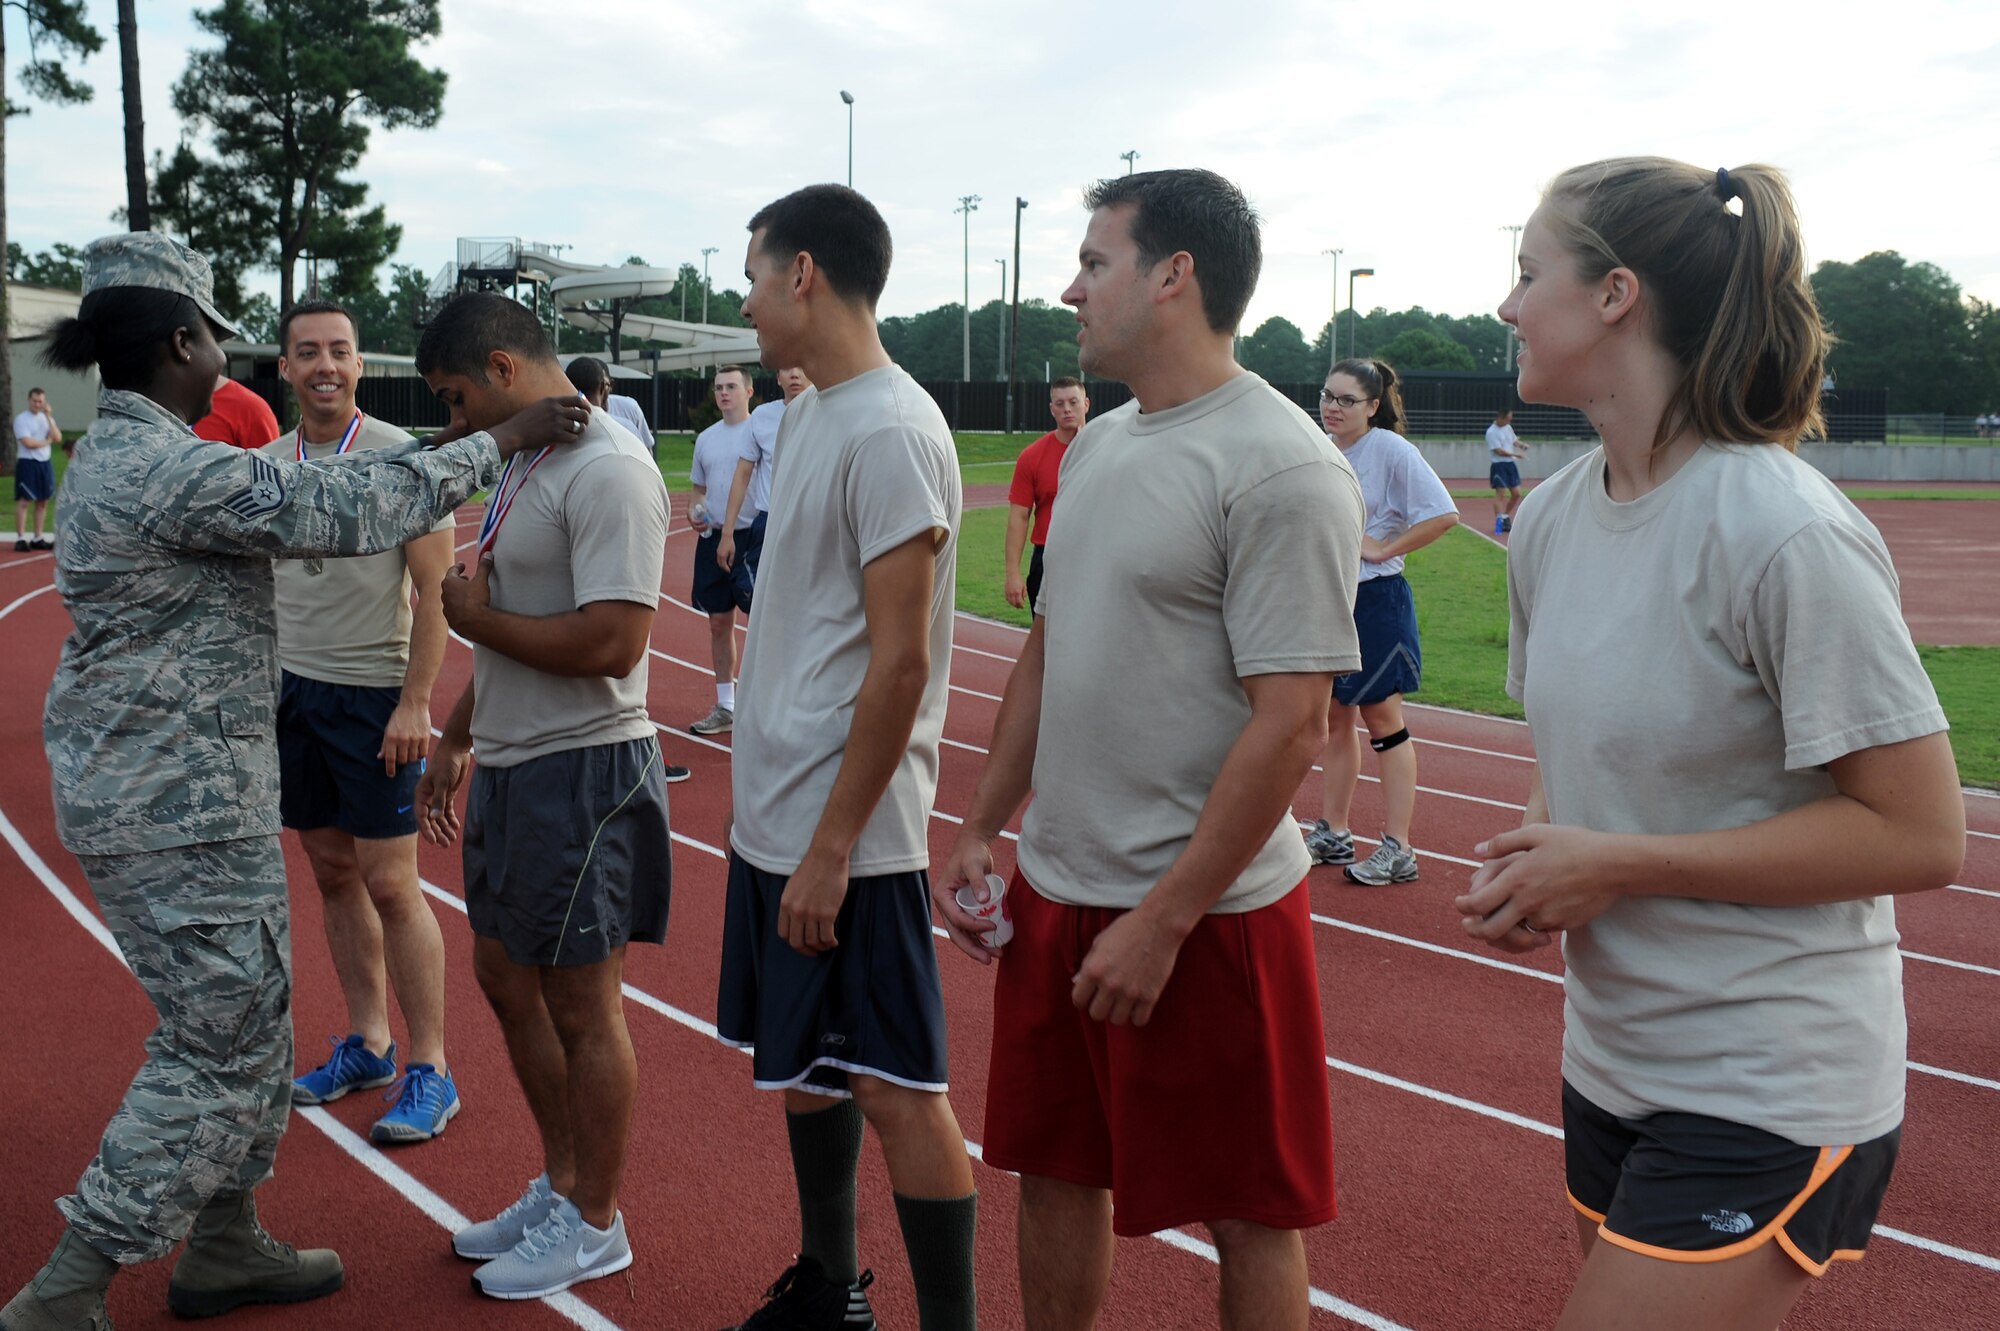 Members of the 482nd Aircraft Maintenance Squadron team are awarded 1st place medals after finishing the Beat the Heat relay run at Seymour Johnson Air Force Base, N.C., Aug. 10, 2012. The 482nd AMXS team finished with a run time of 5:27. (U.S. Air Force photo/Airman 1st Class John Nieves Camacho/Released)